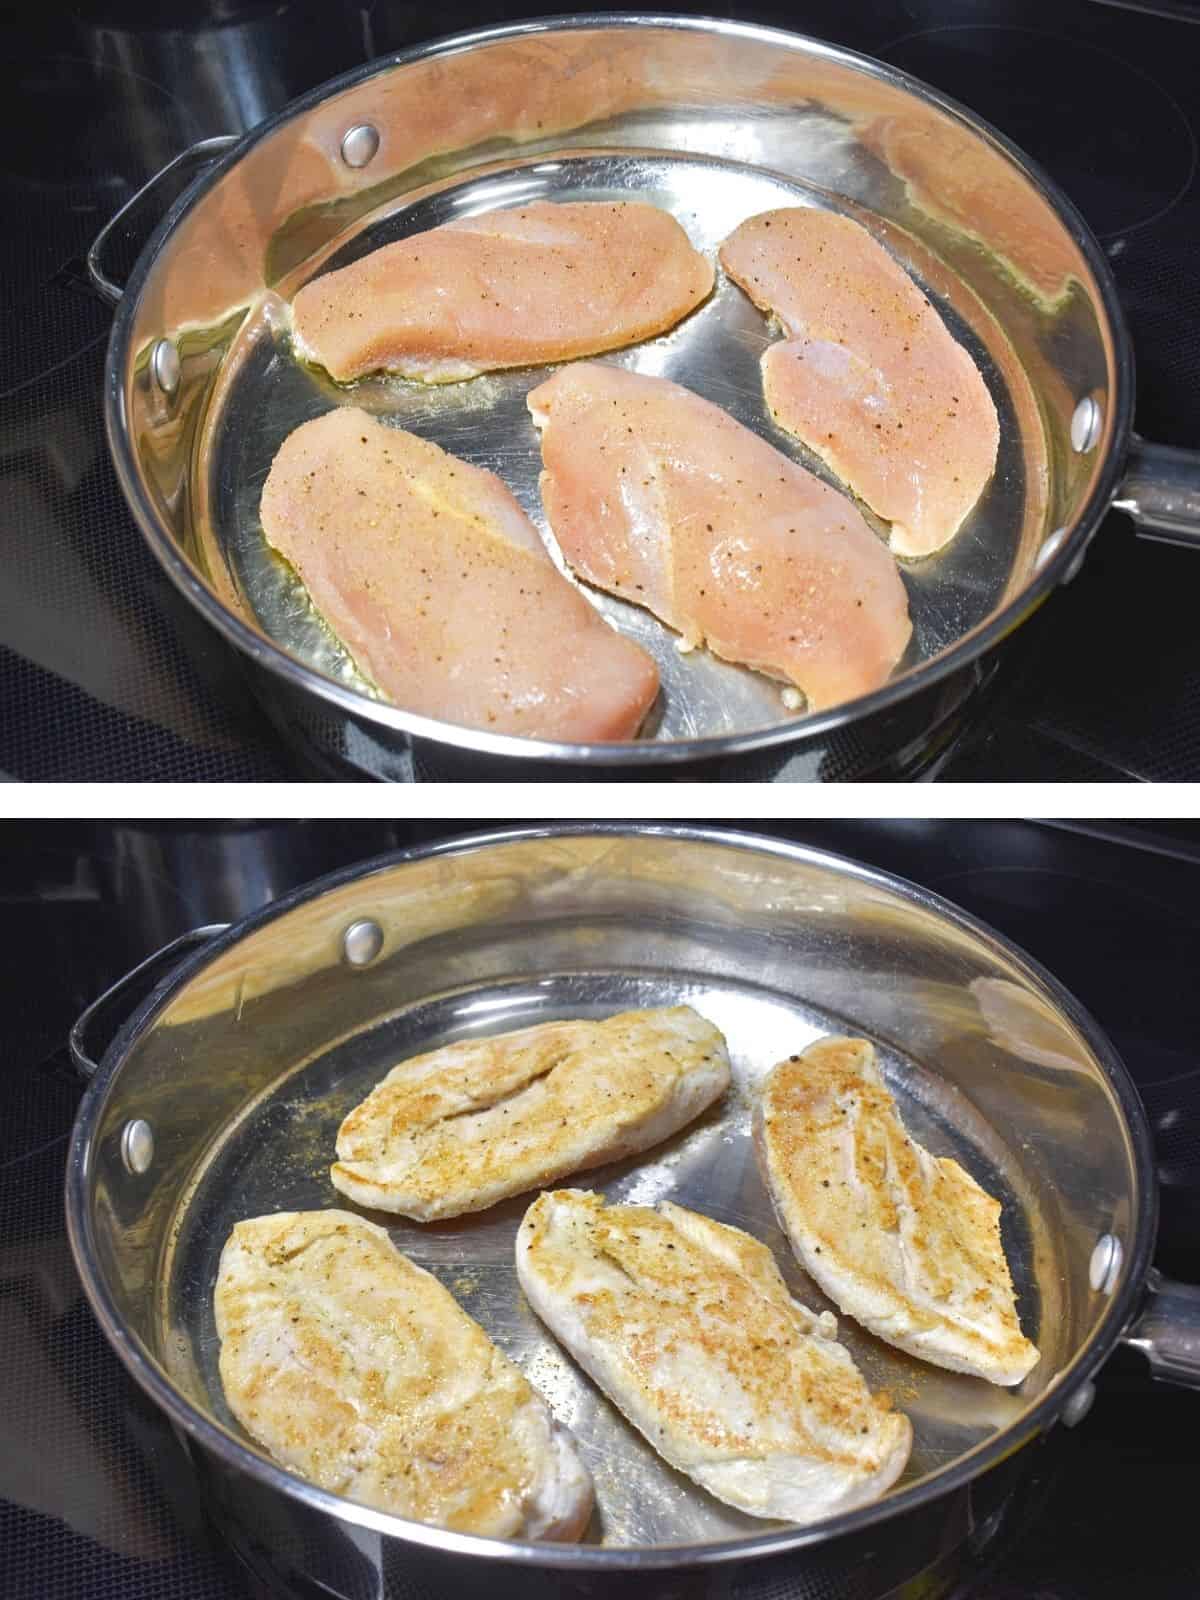 Two images of the chicken browning in a large skillet.